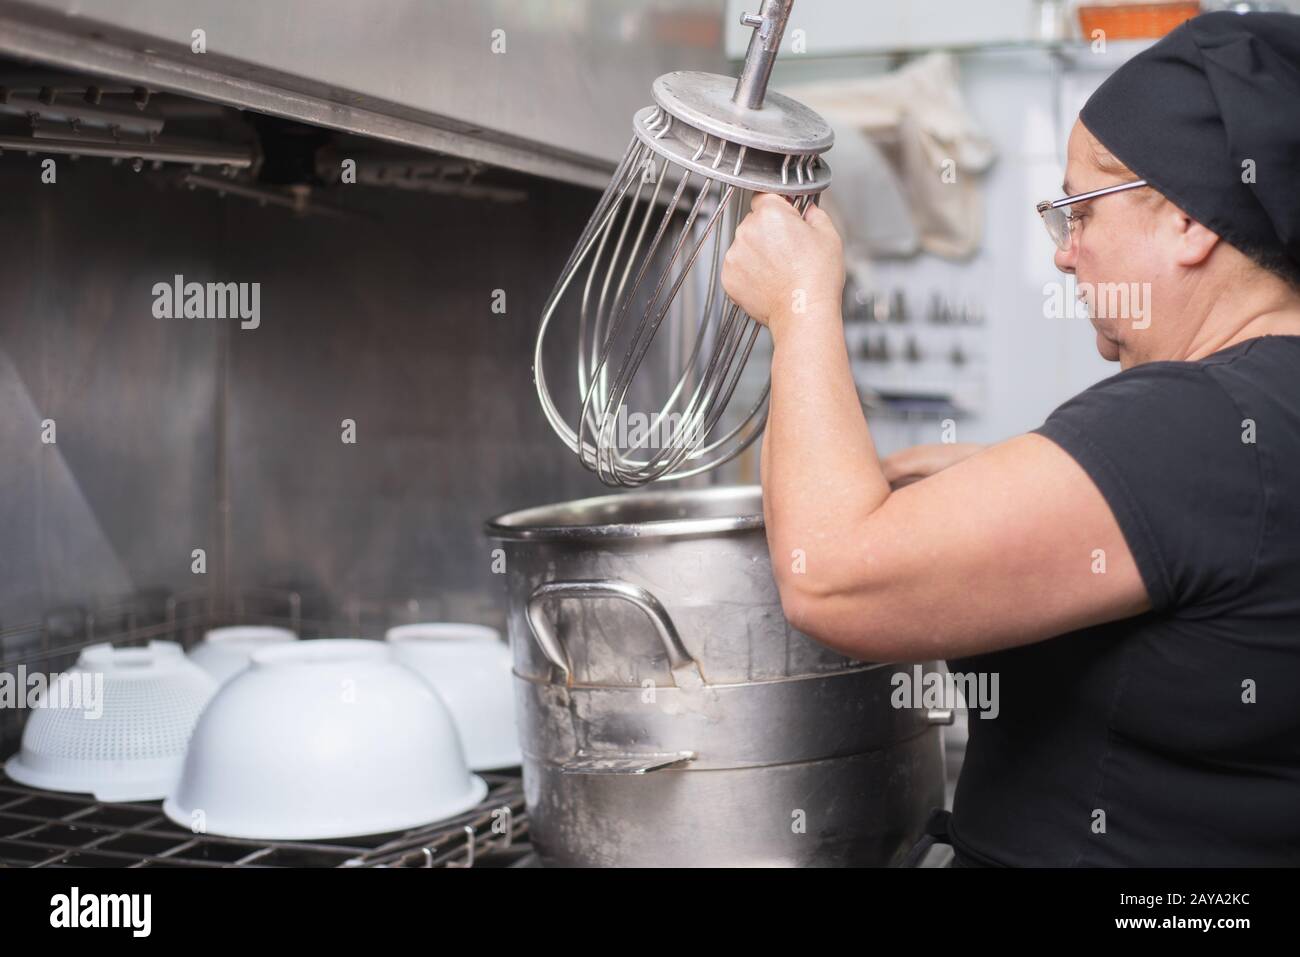 woman employee loading casseroles into an industrial dishwasher in the restaurant. Stock Photo